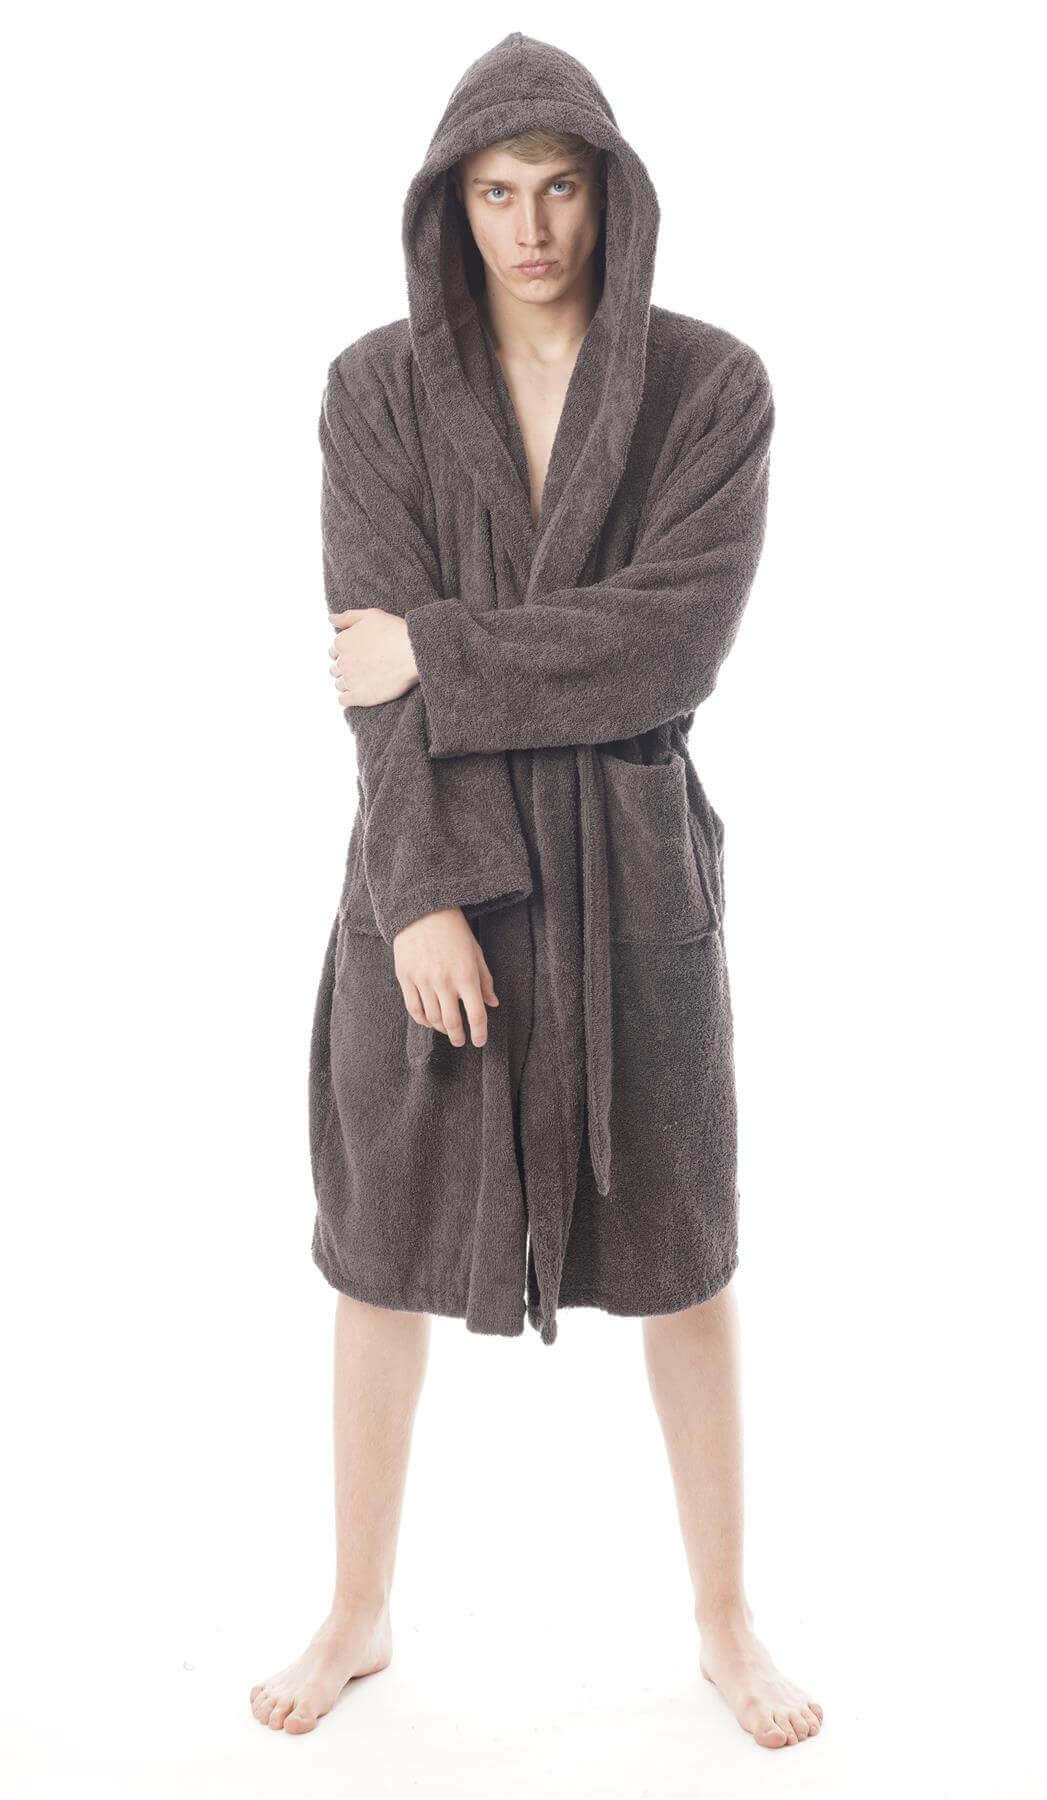 Men's Luxury Dressing Gowns | Made in Britain | Finest Quality Cottons | PJ  Pan